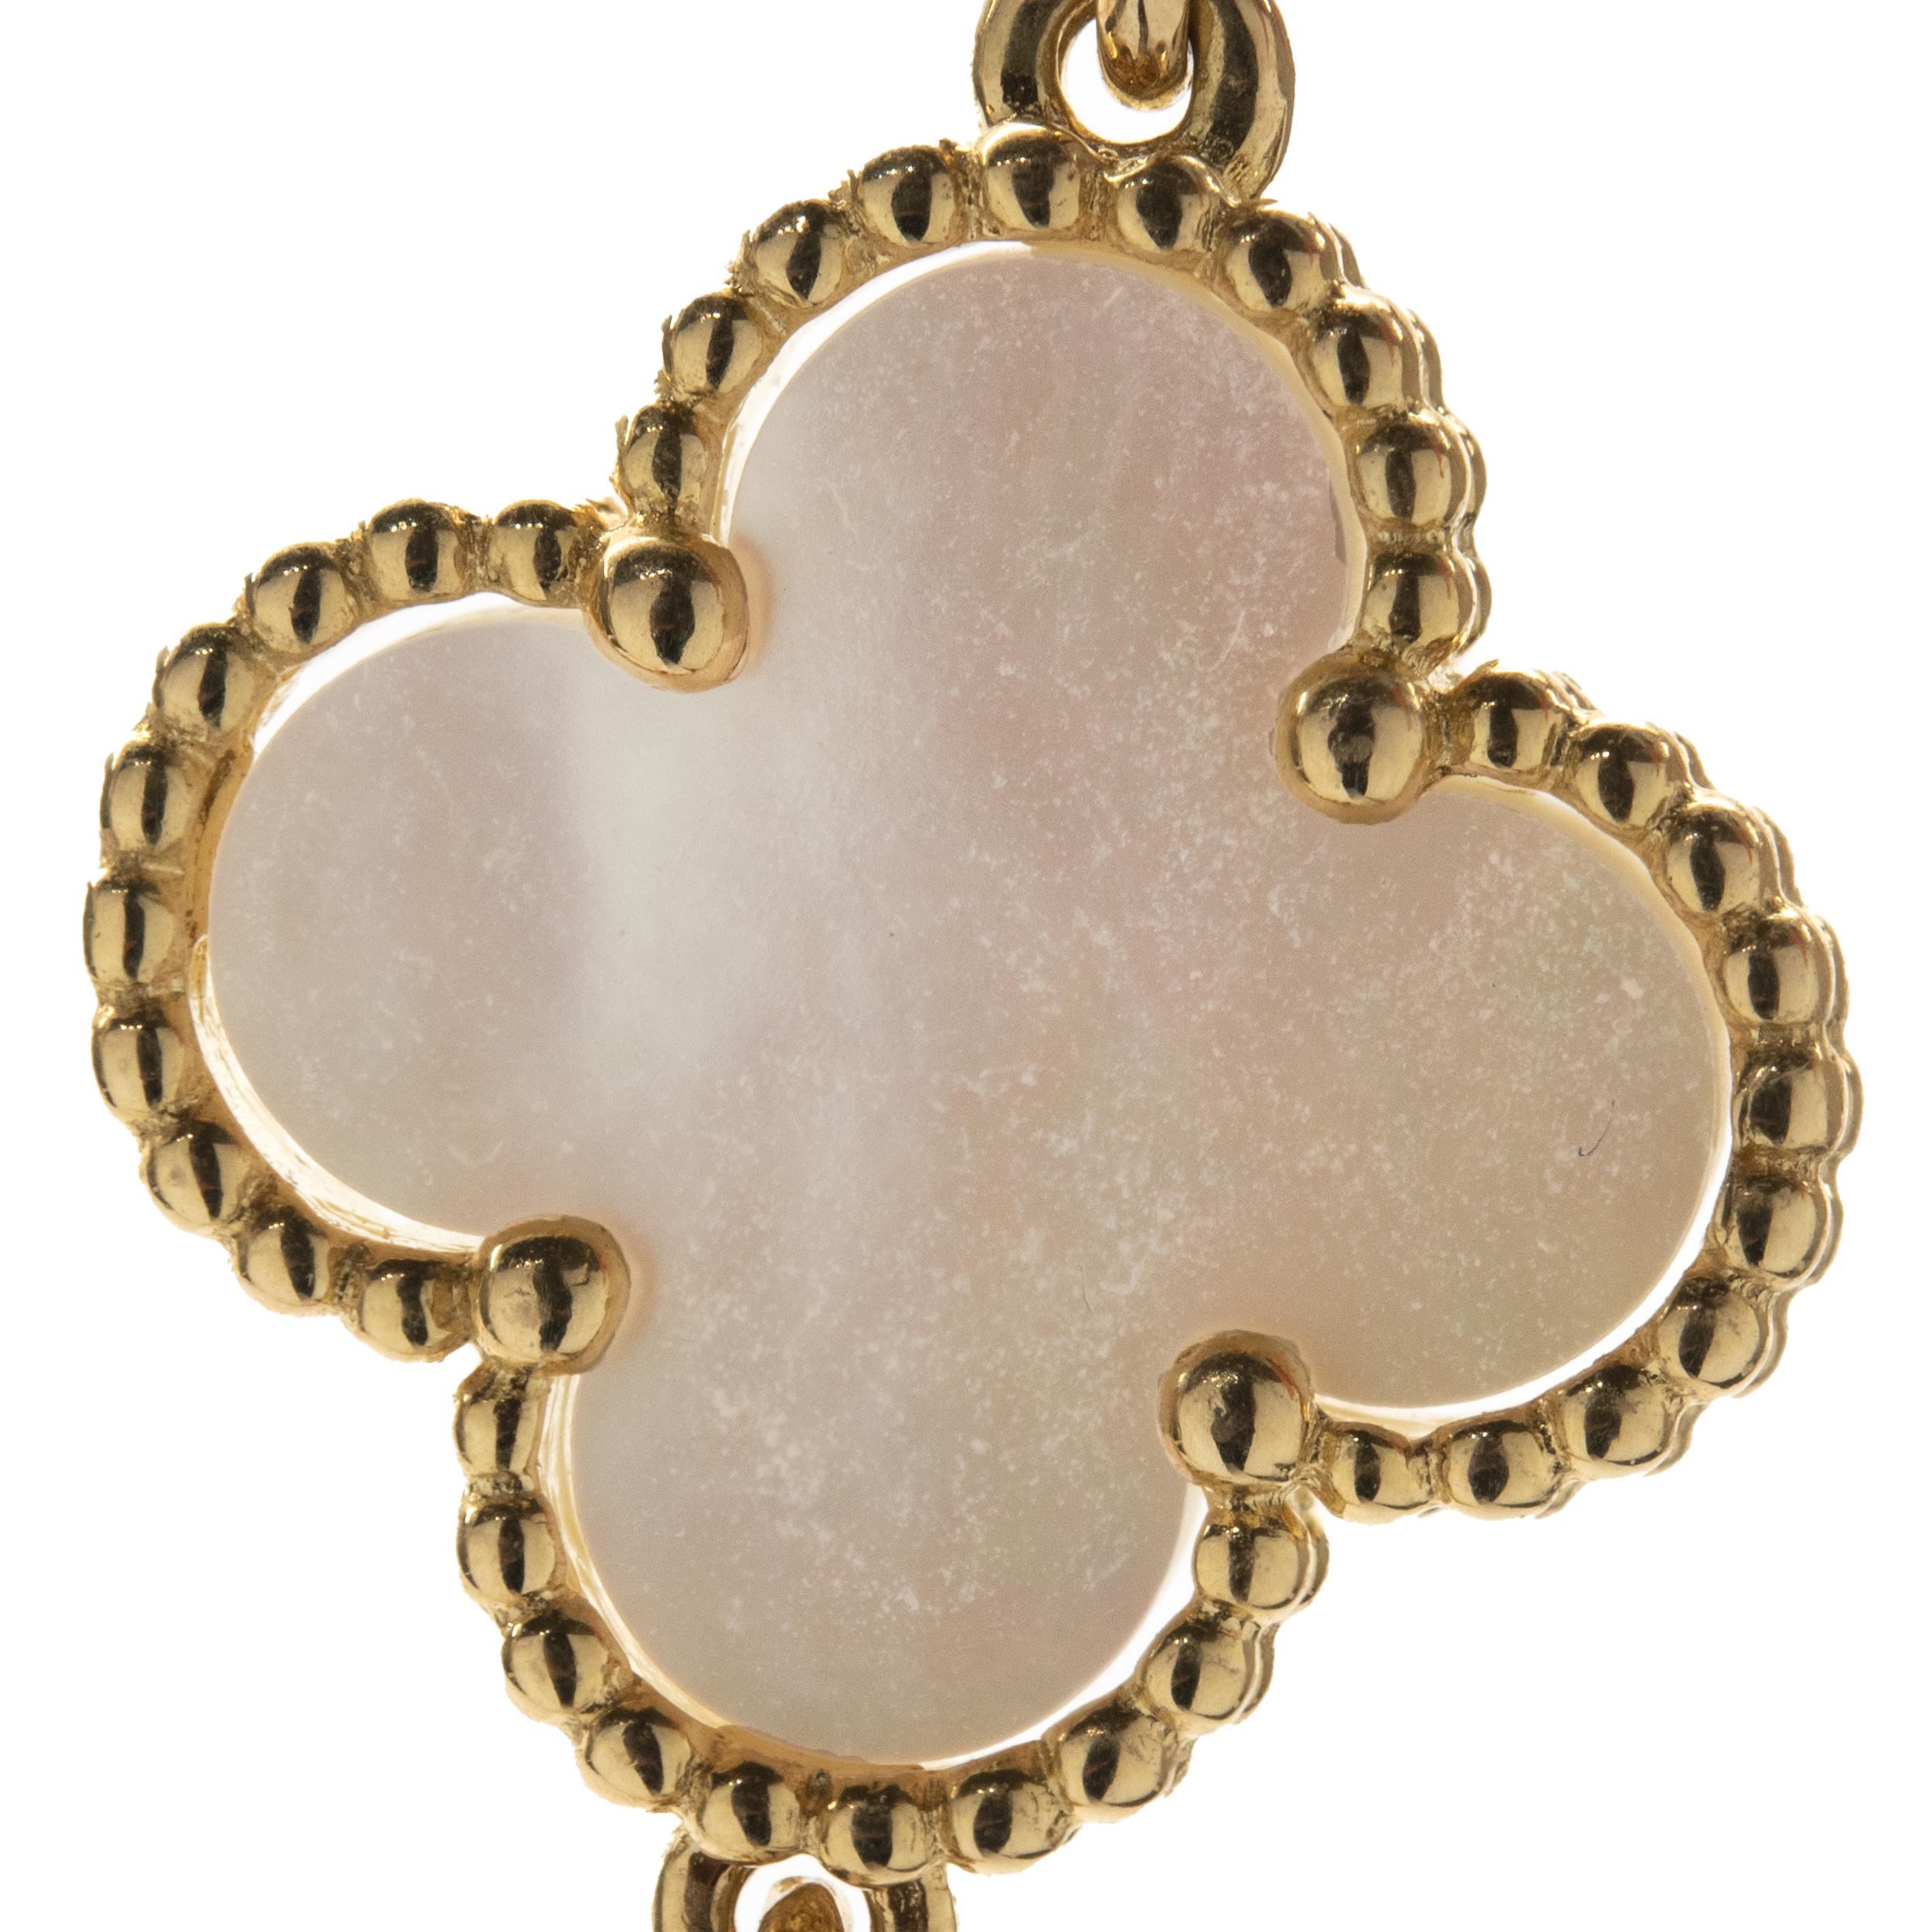 Designer: Van Cleef & Arpels
Material: 18K yellow gold
Weight:  25.91 grams
Dimensions: necklace measures 18-inches long
